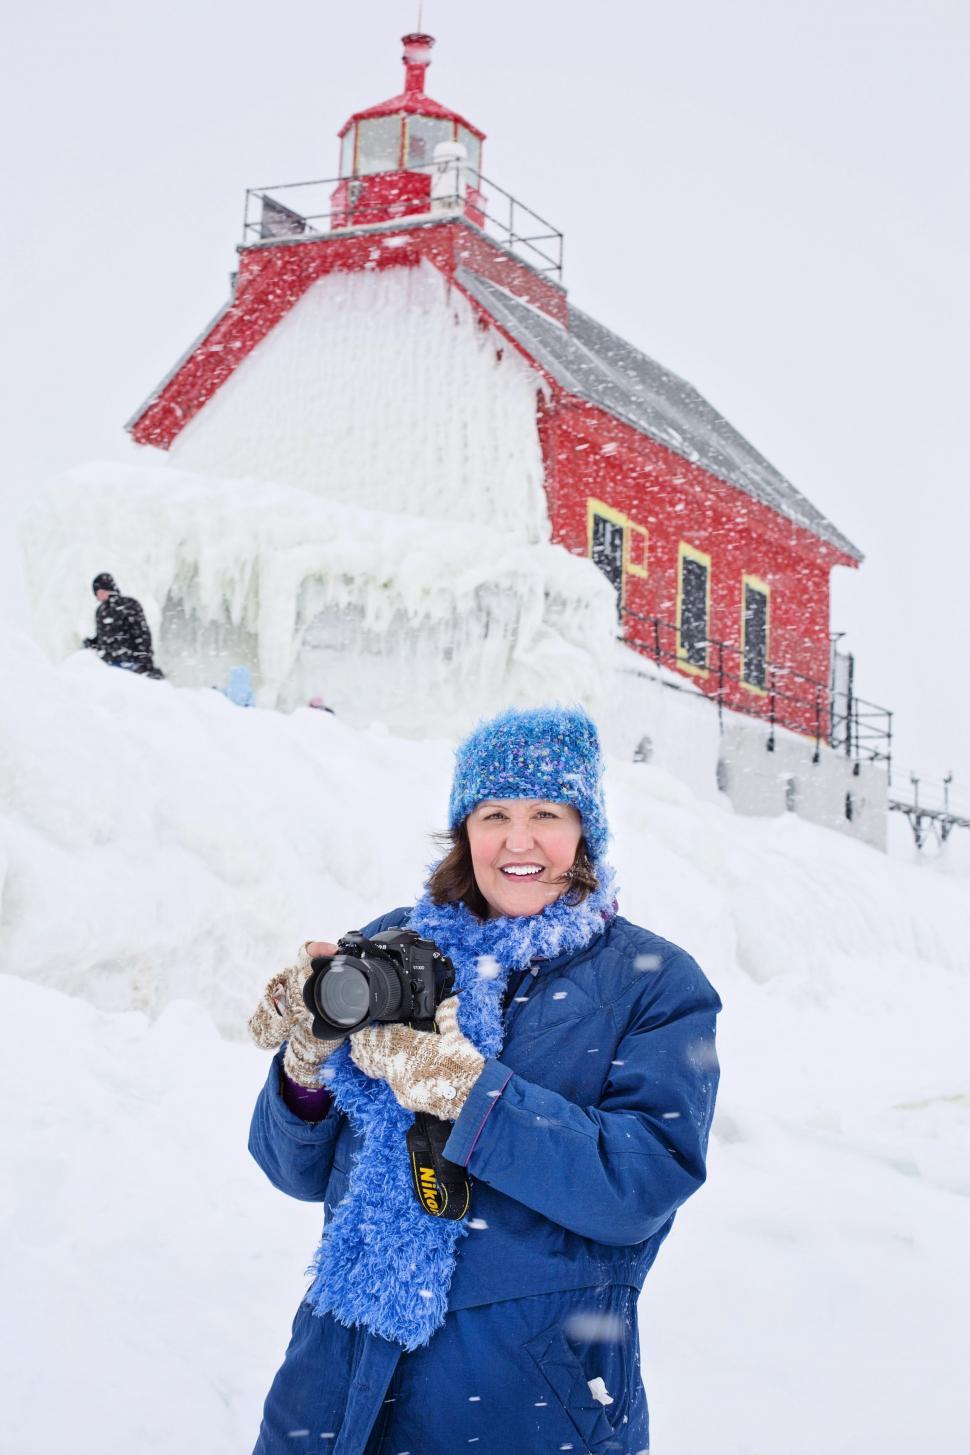 Free Image of Female Photographer and Lighthouse in Snowfall - Looking at camera  